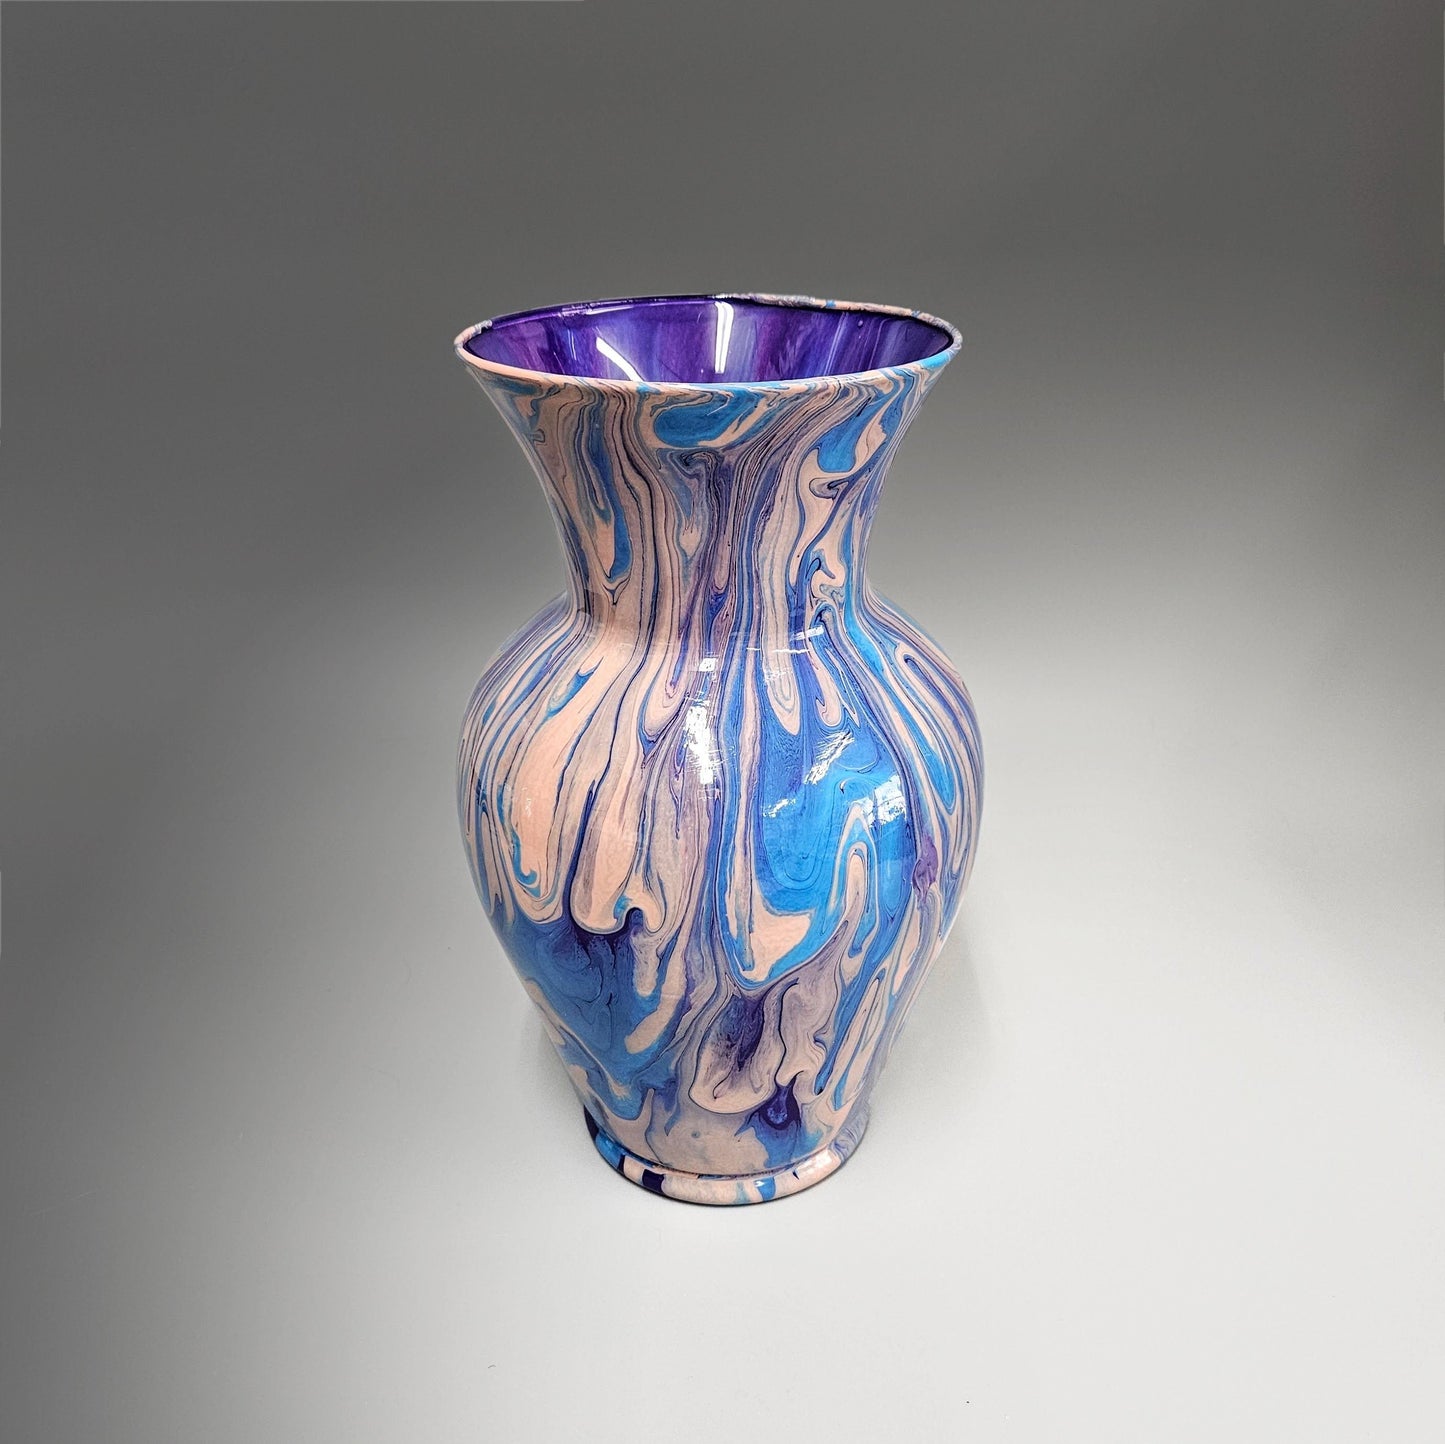 Glass Art Painted Vase in Blue, Purple and Pastel Peach